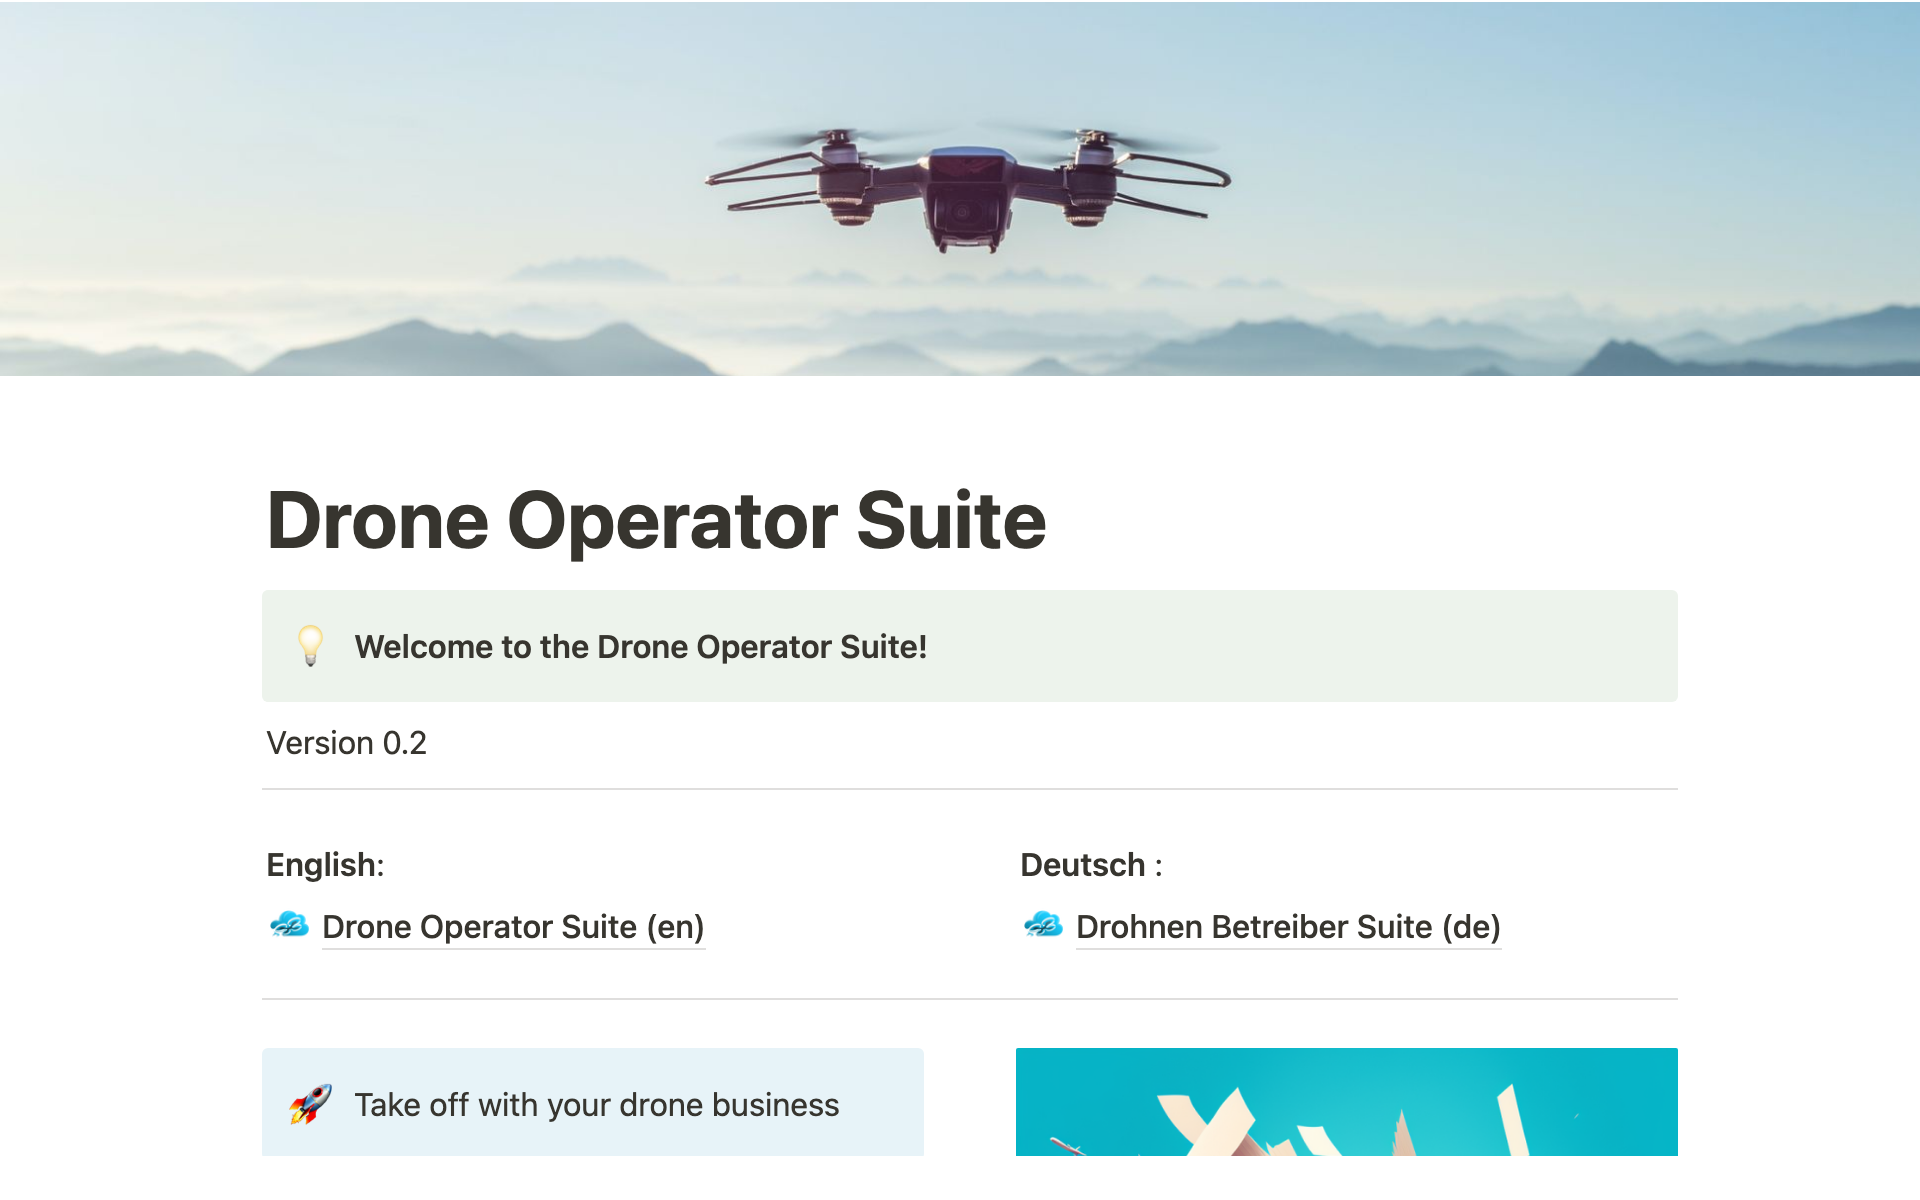 The Drone Operator Suite is a solution for effortlessly managing every aspect of a drone business.